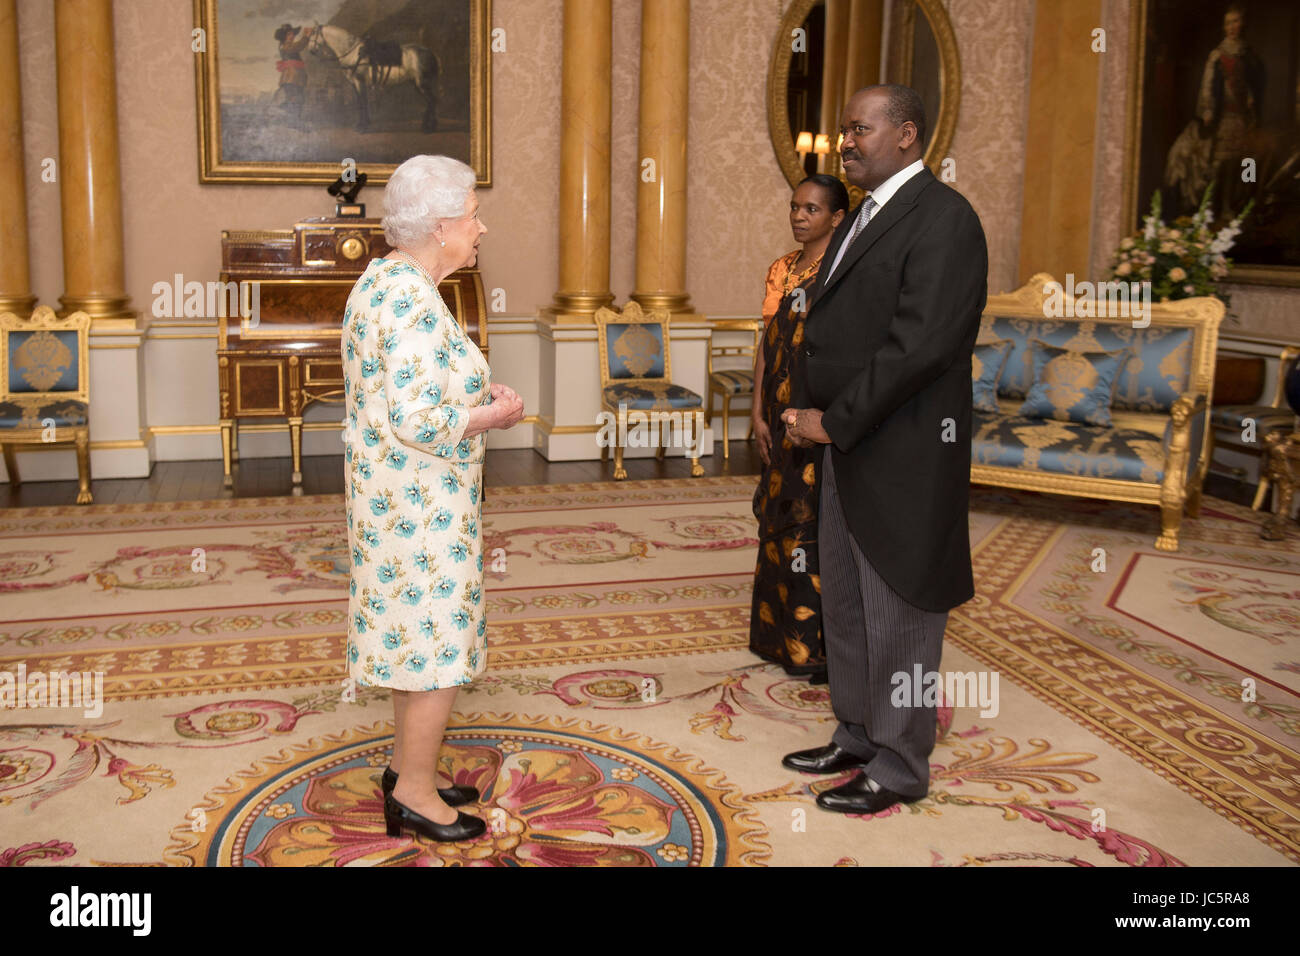 Queen Elizabeth II is presented with the Letters of Recall of his predecessor and his own Letters of Credence by His Excellency Ernest Ndabashinze, the Ambassador from the Republic of Burundi, as Mrs Maria Gloriose Kankindi looks on, during a private audience in Buckingham Palace, central London. Stock Photo